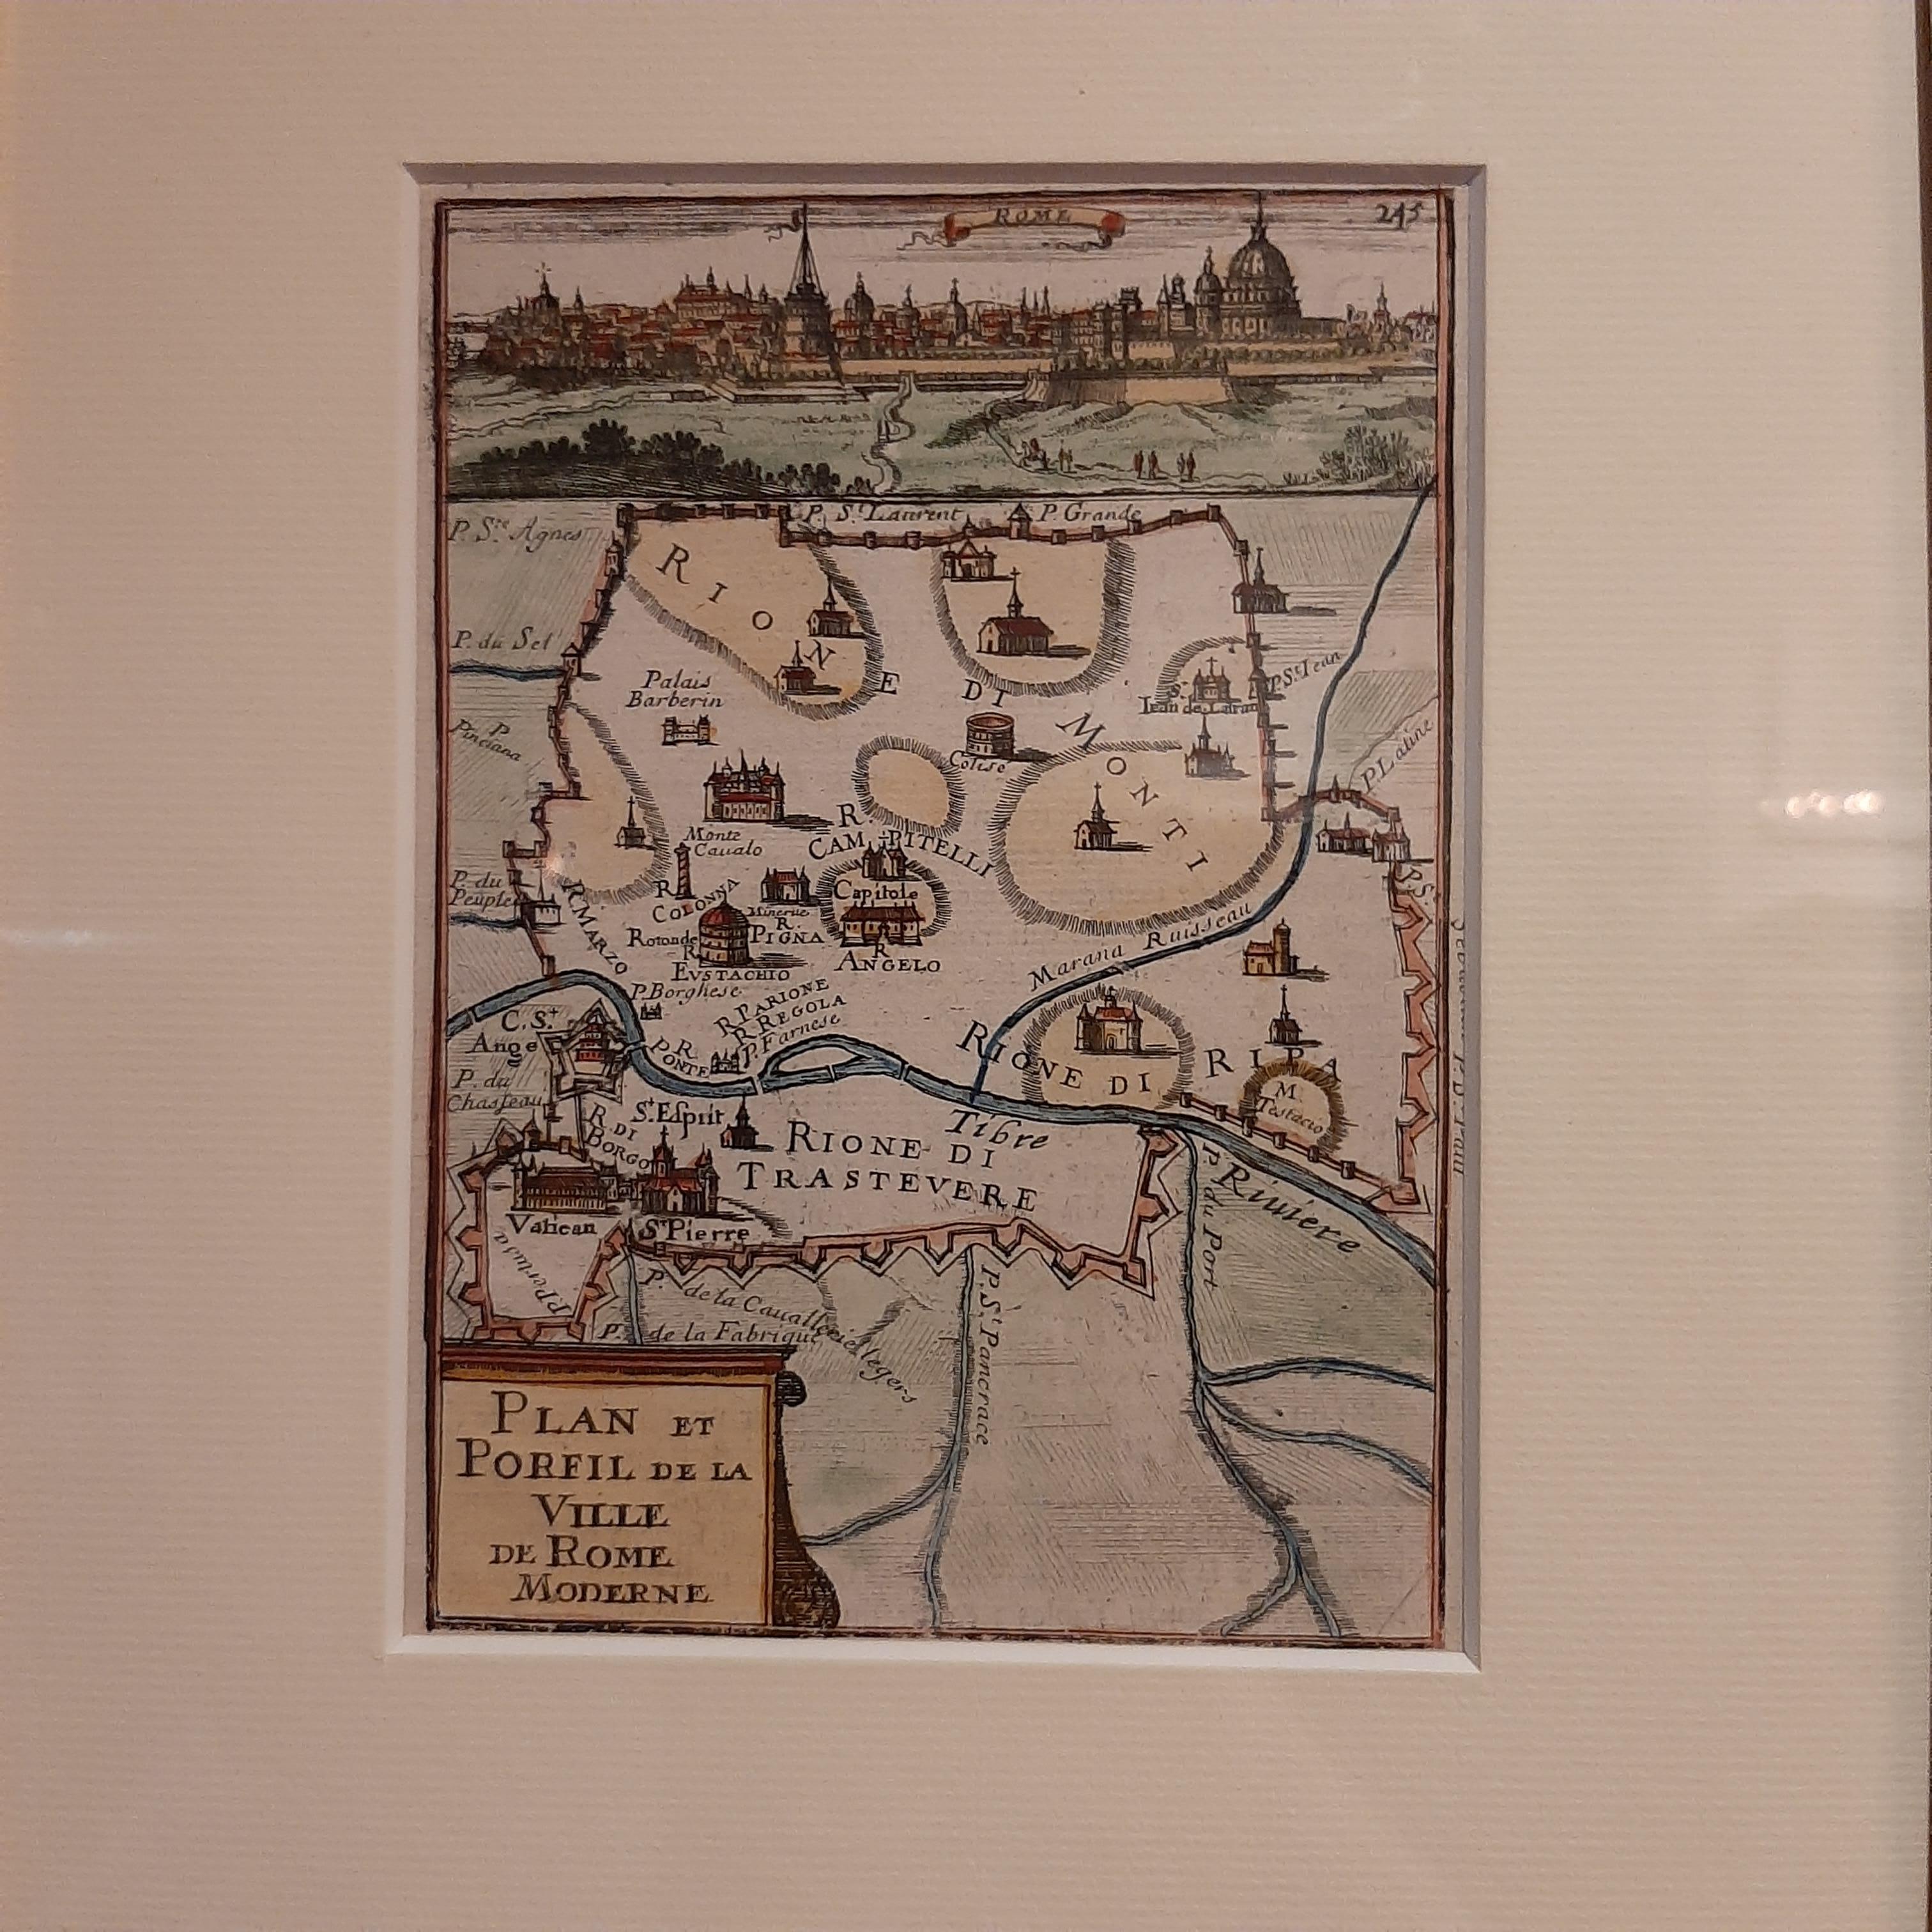 Antique map titled 'Plan et Porfil de la Ville de Rome Moderne'. Map and view of the city of Rome, Italy. This map originates from 'Description de l'Univers' by A.M. Mallet. Published circa 1683. 

Frame included. We carefully pack our framed